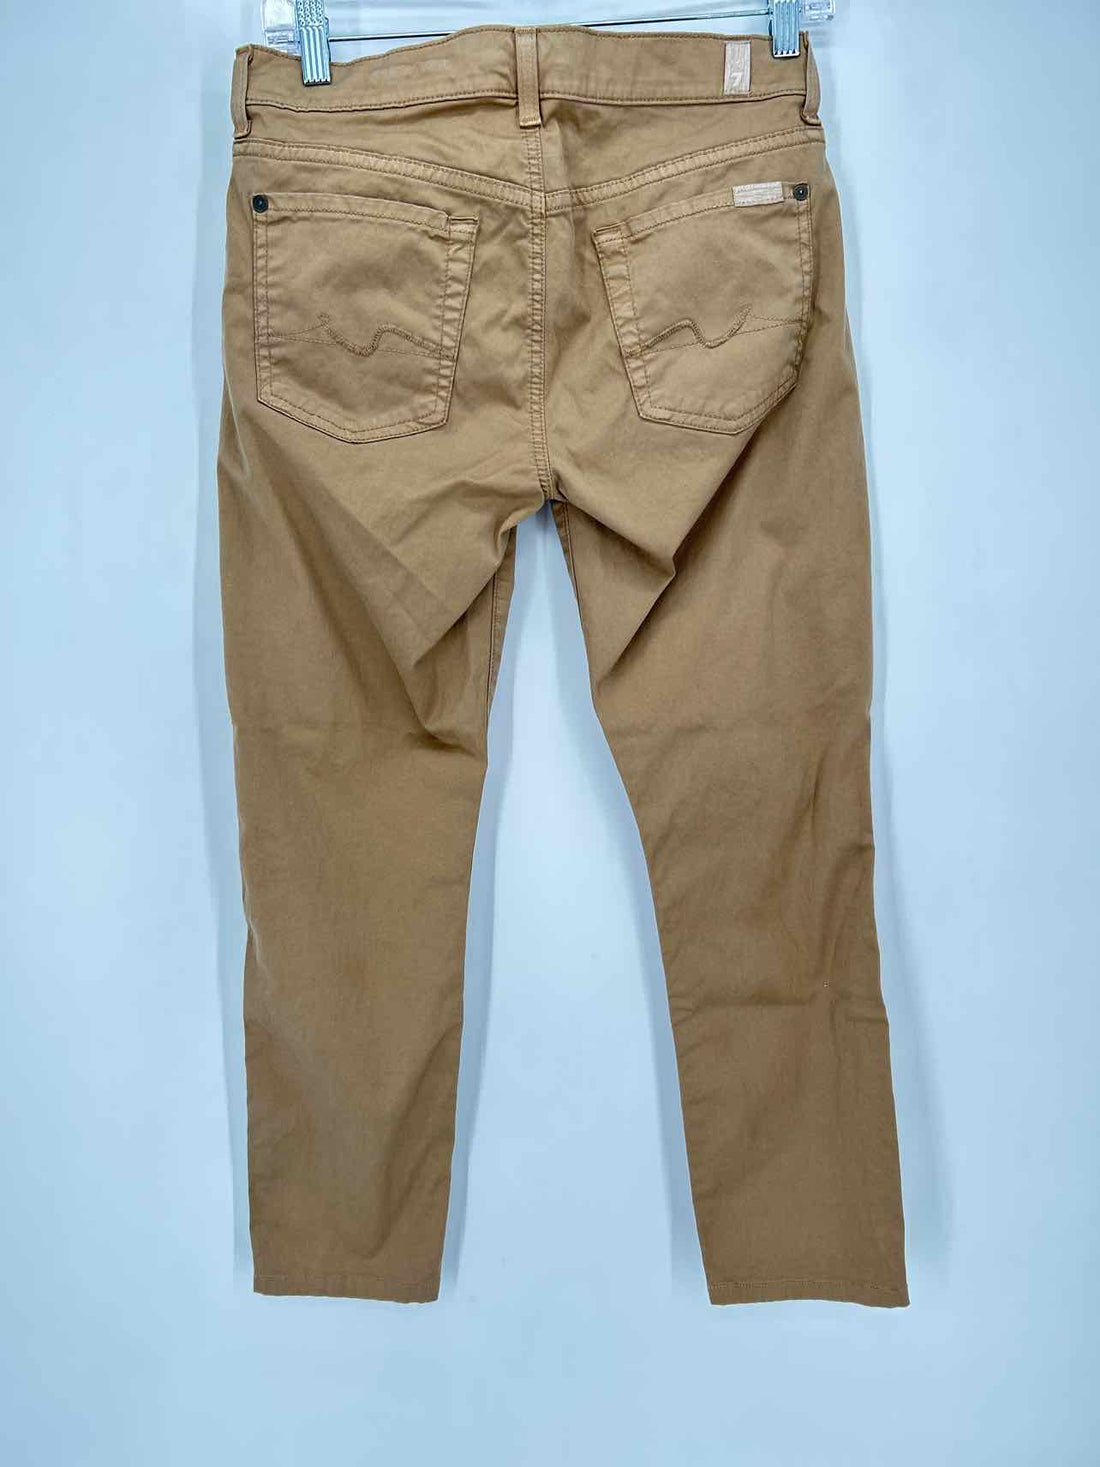 7 For All Mankind Size 28 Tan Pants